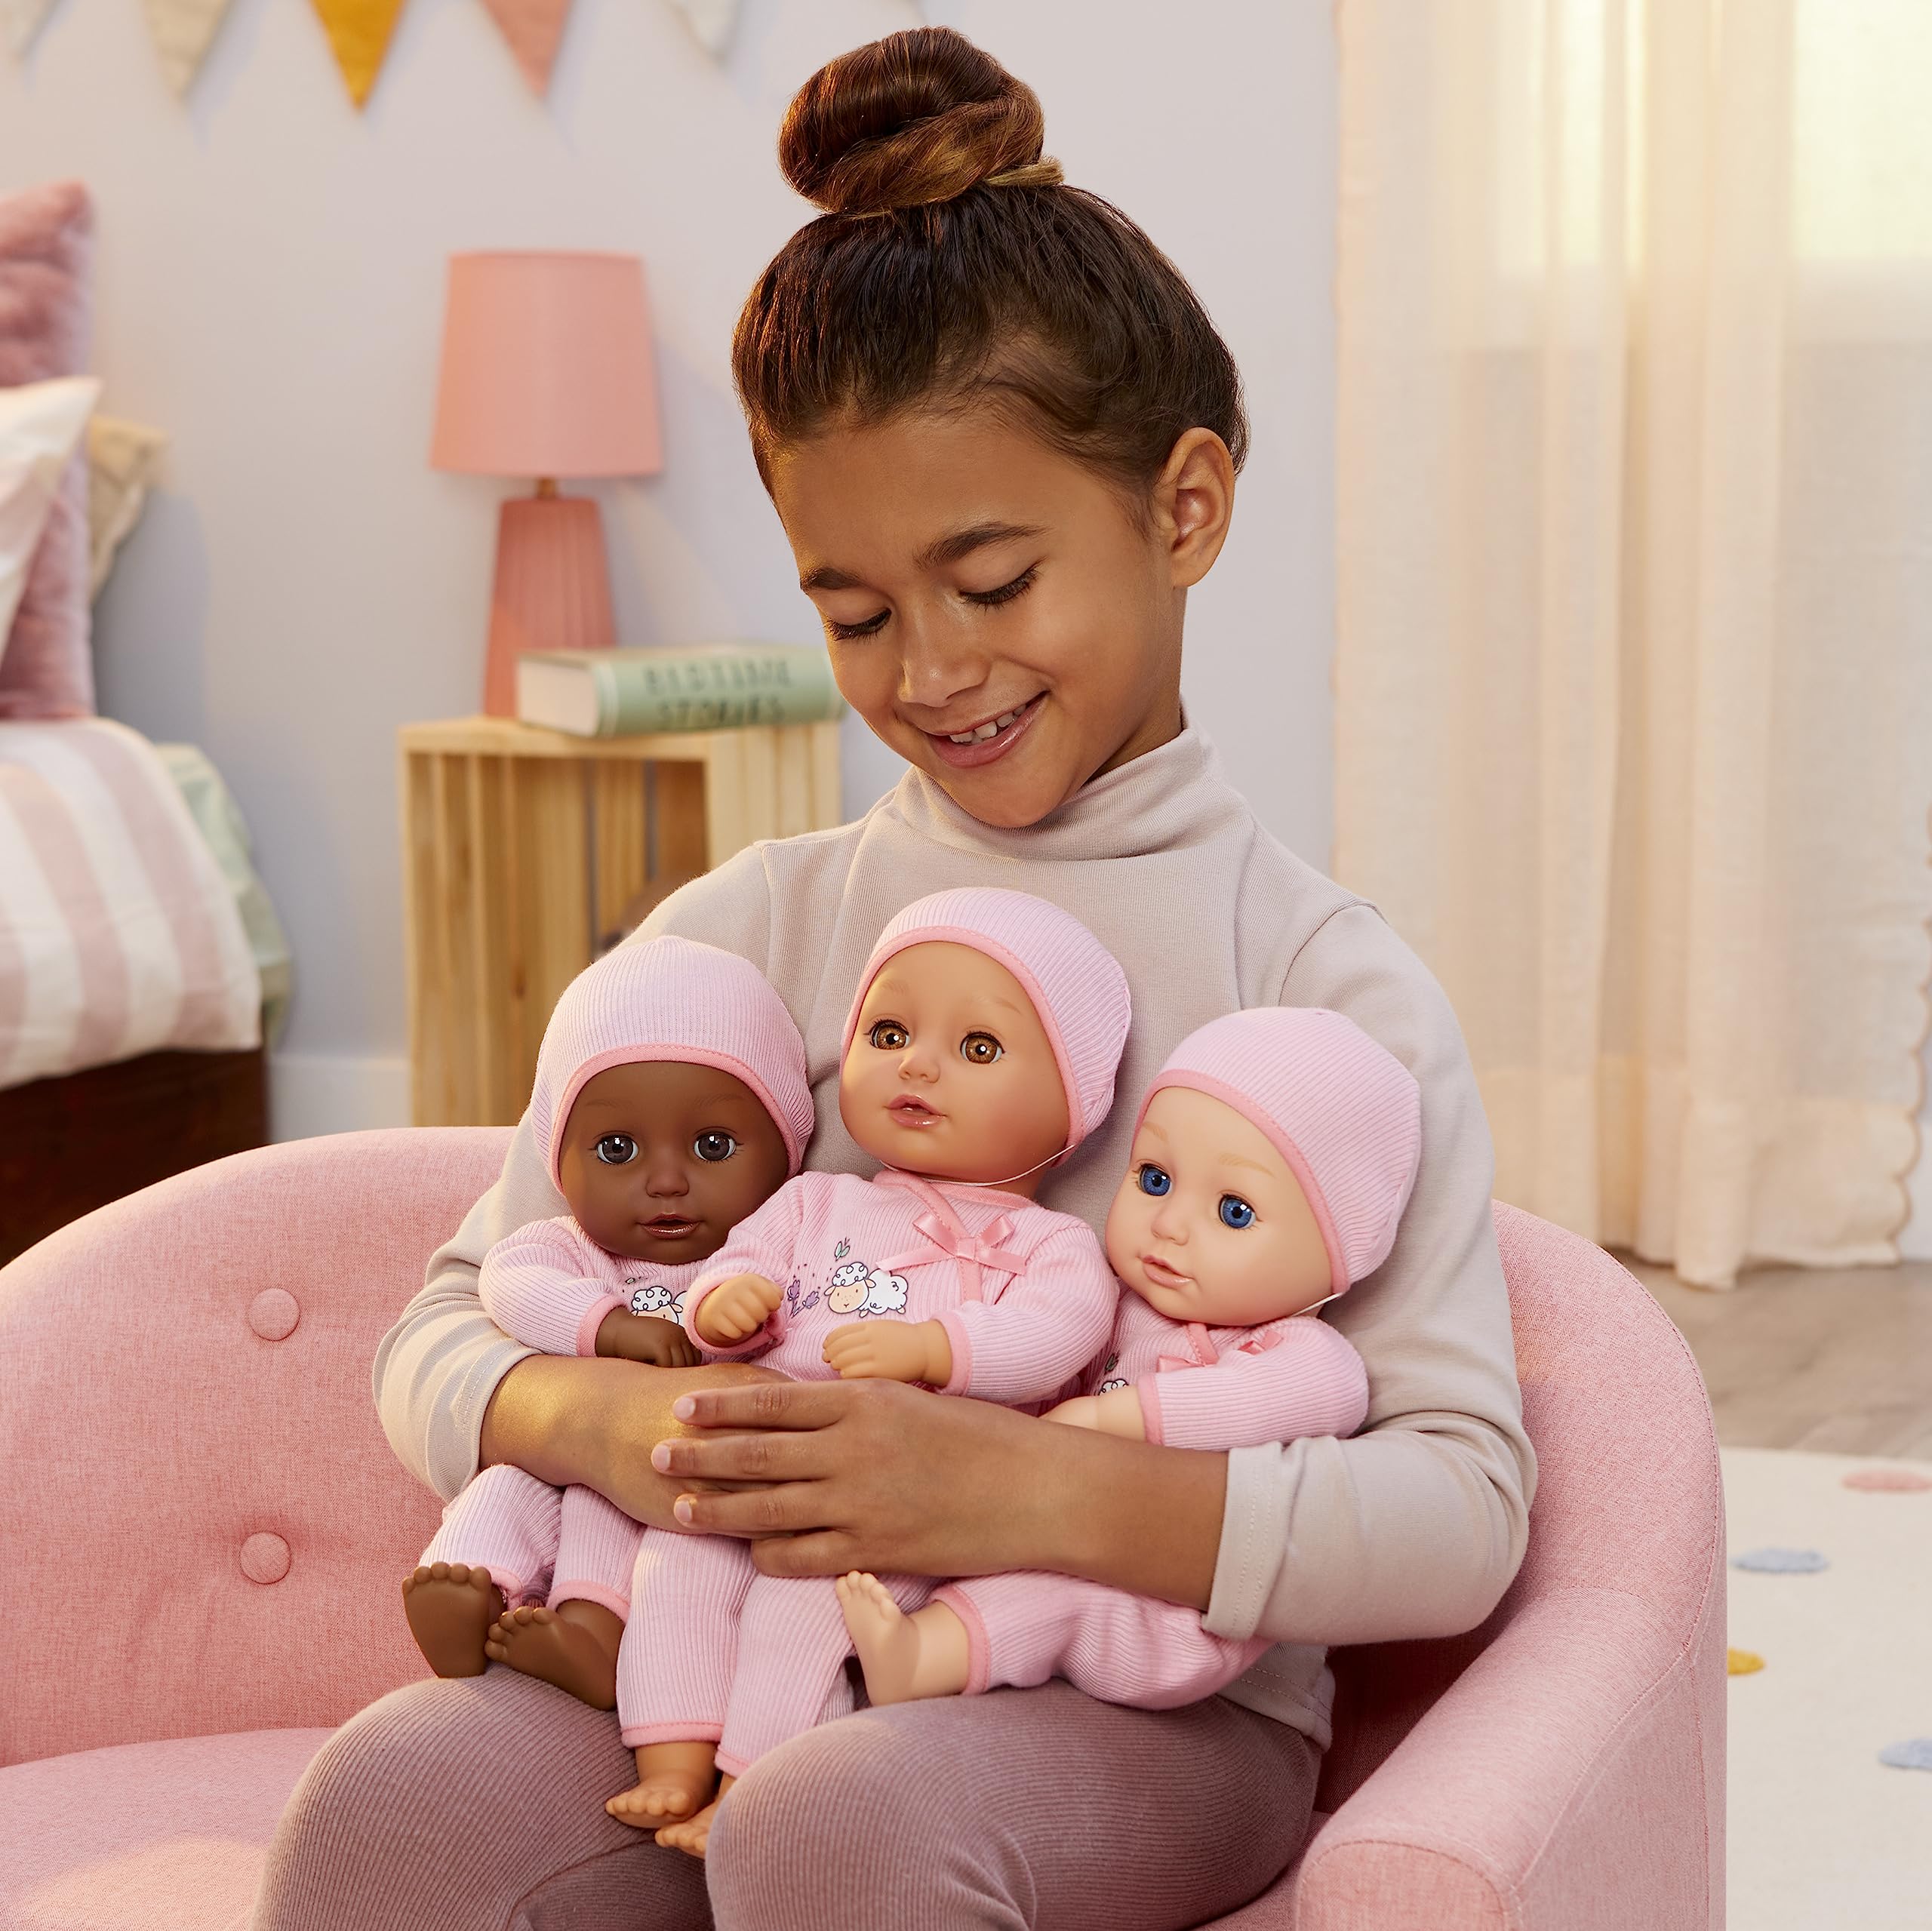 Baby Born My First Baby Doll Harper - Dark Brown Eyes: Realistic Soft-Bodied Baby Doll for Kids Ages 1 & Up, Eyes Open & Close, Baby Doll with Bottle